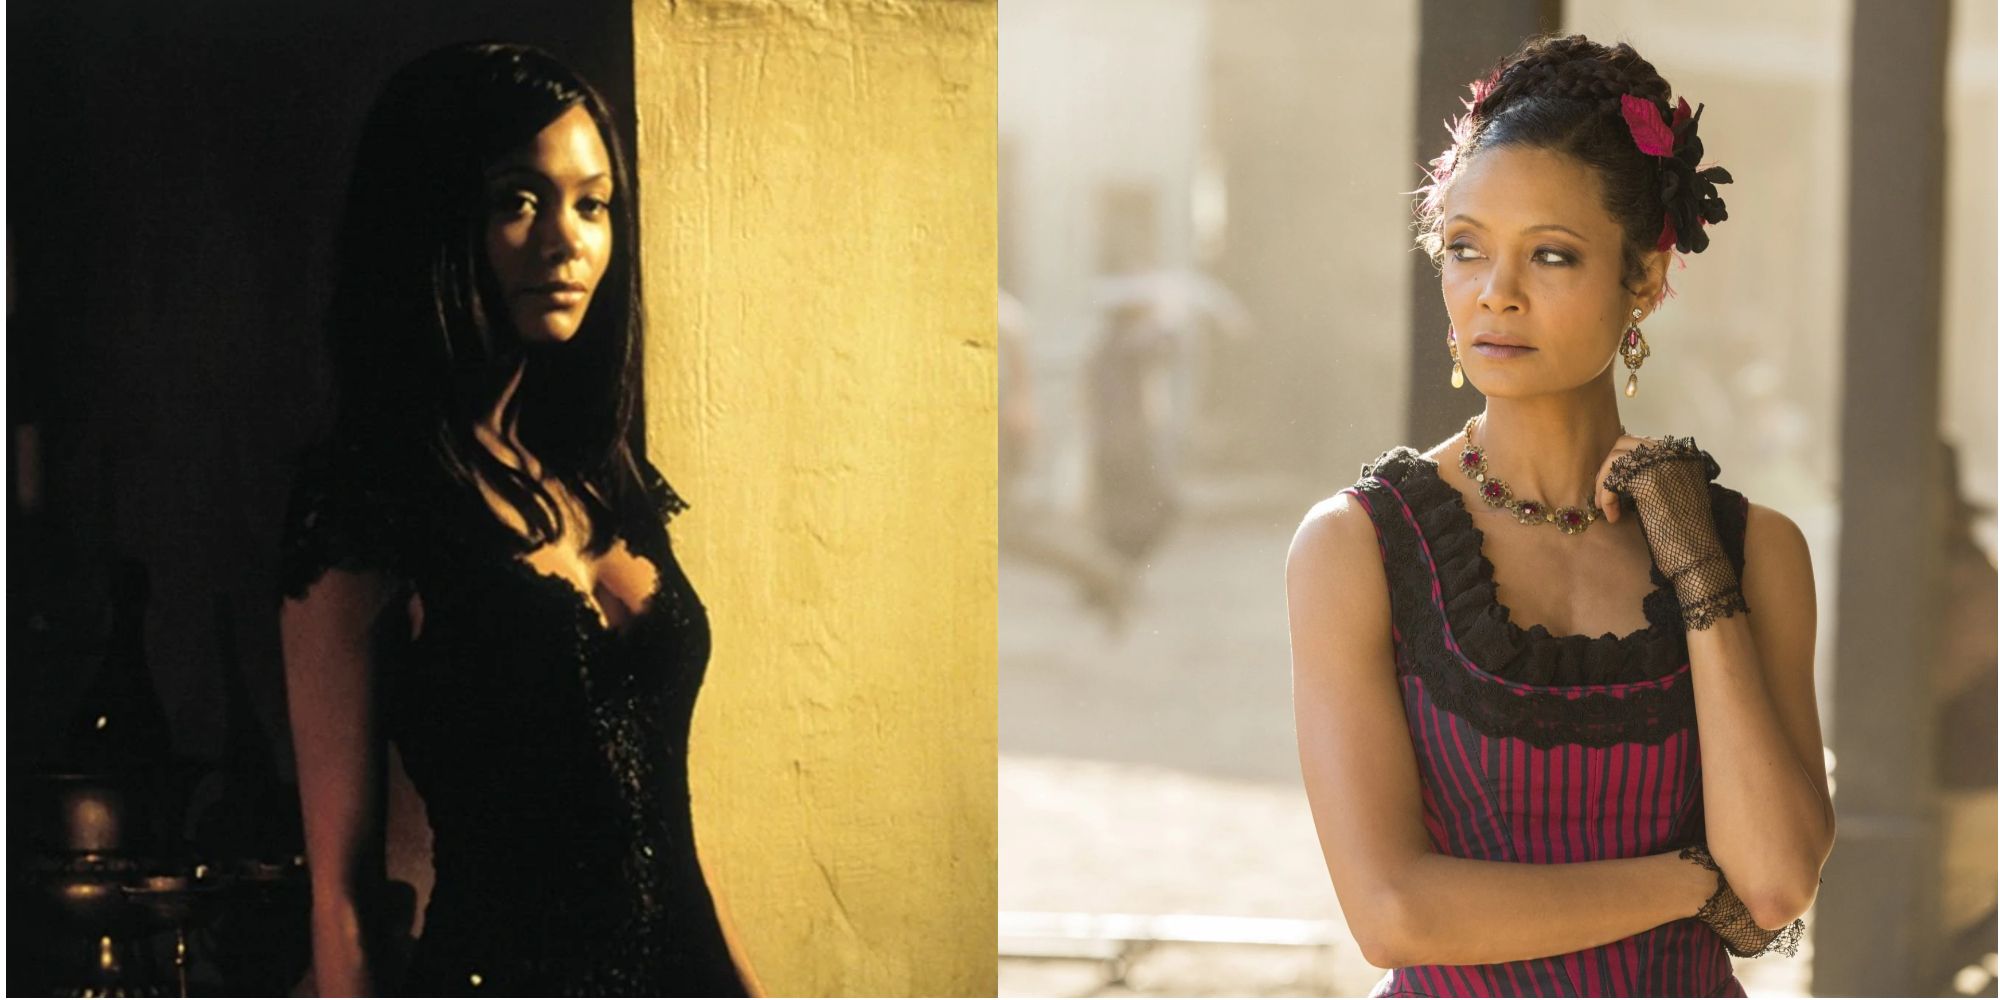 Split image of Thandiwe Newton in Mission: Impossible 2 and in Westworld